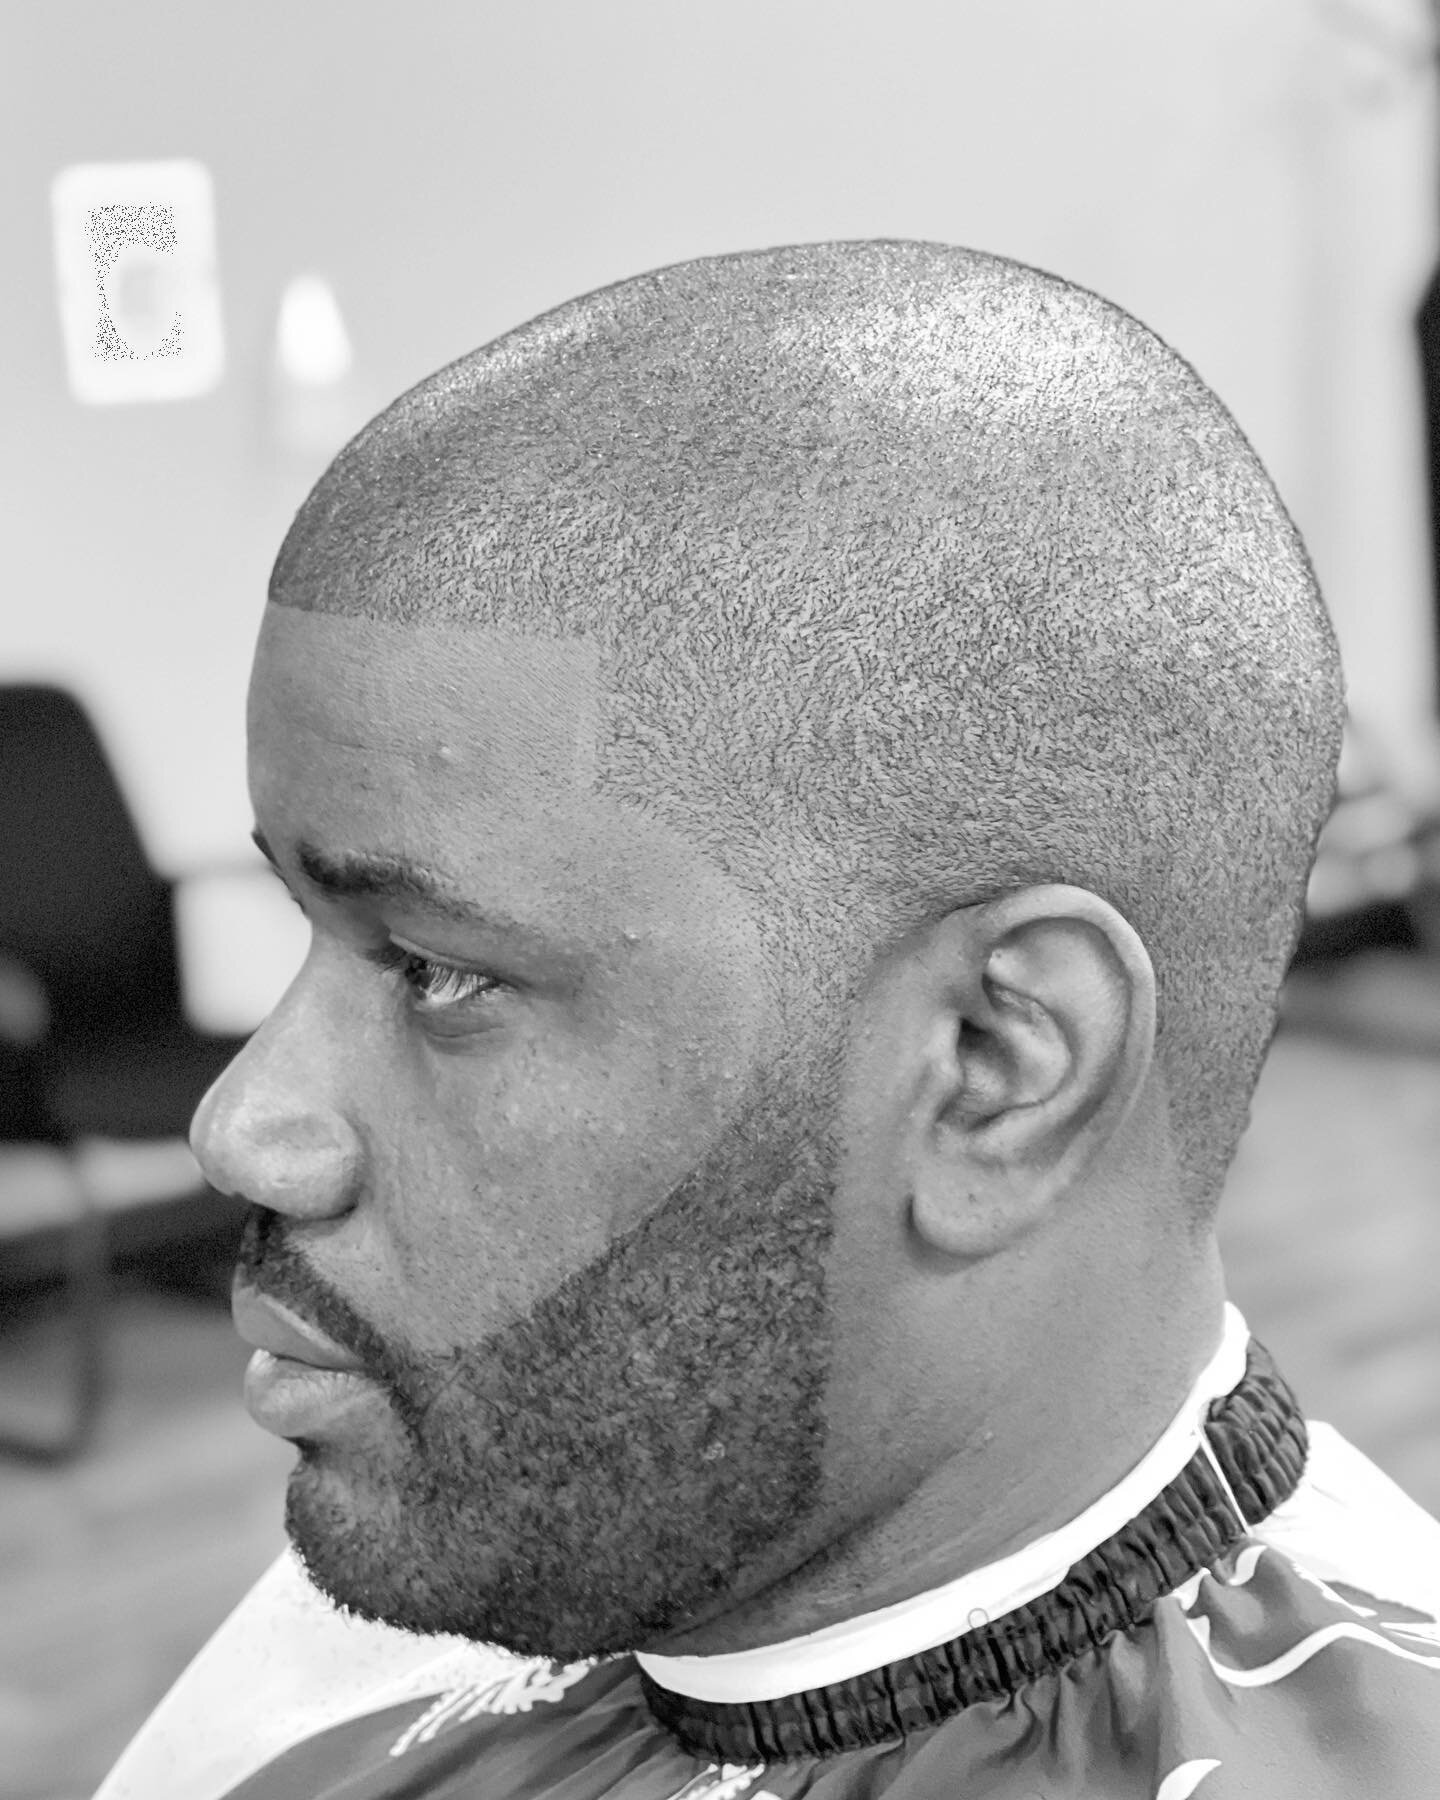 We can go as low as you want, My Razor line up will always be on point.

Redthebarbersj.com. 

#sanjose#sanjosestate#dtsj#downtown#sanfrancisco#losangeles#newyork#ybfb#mcblends